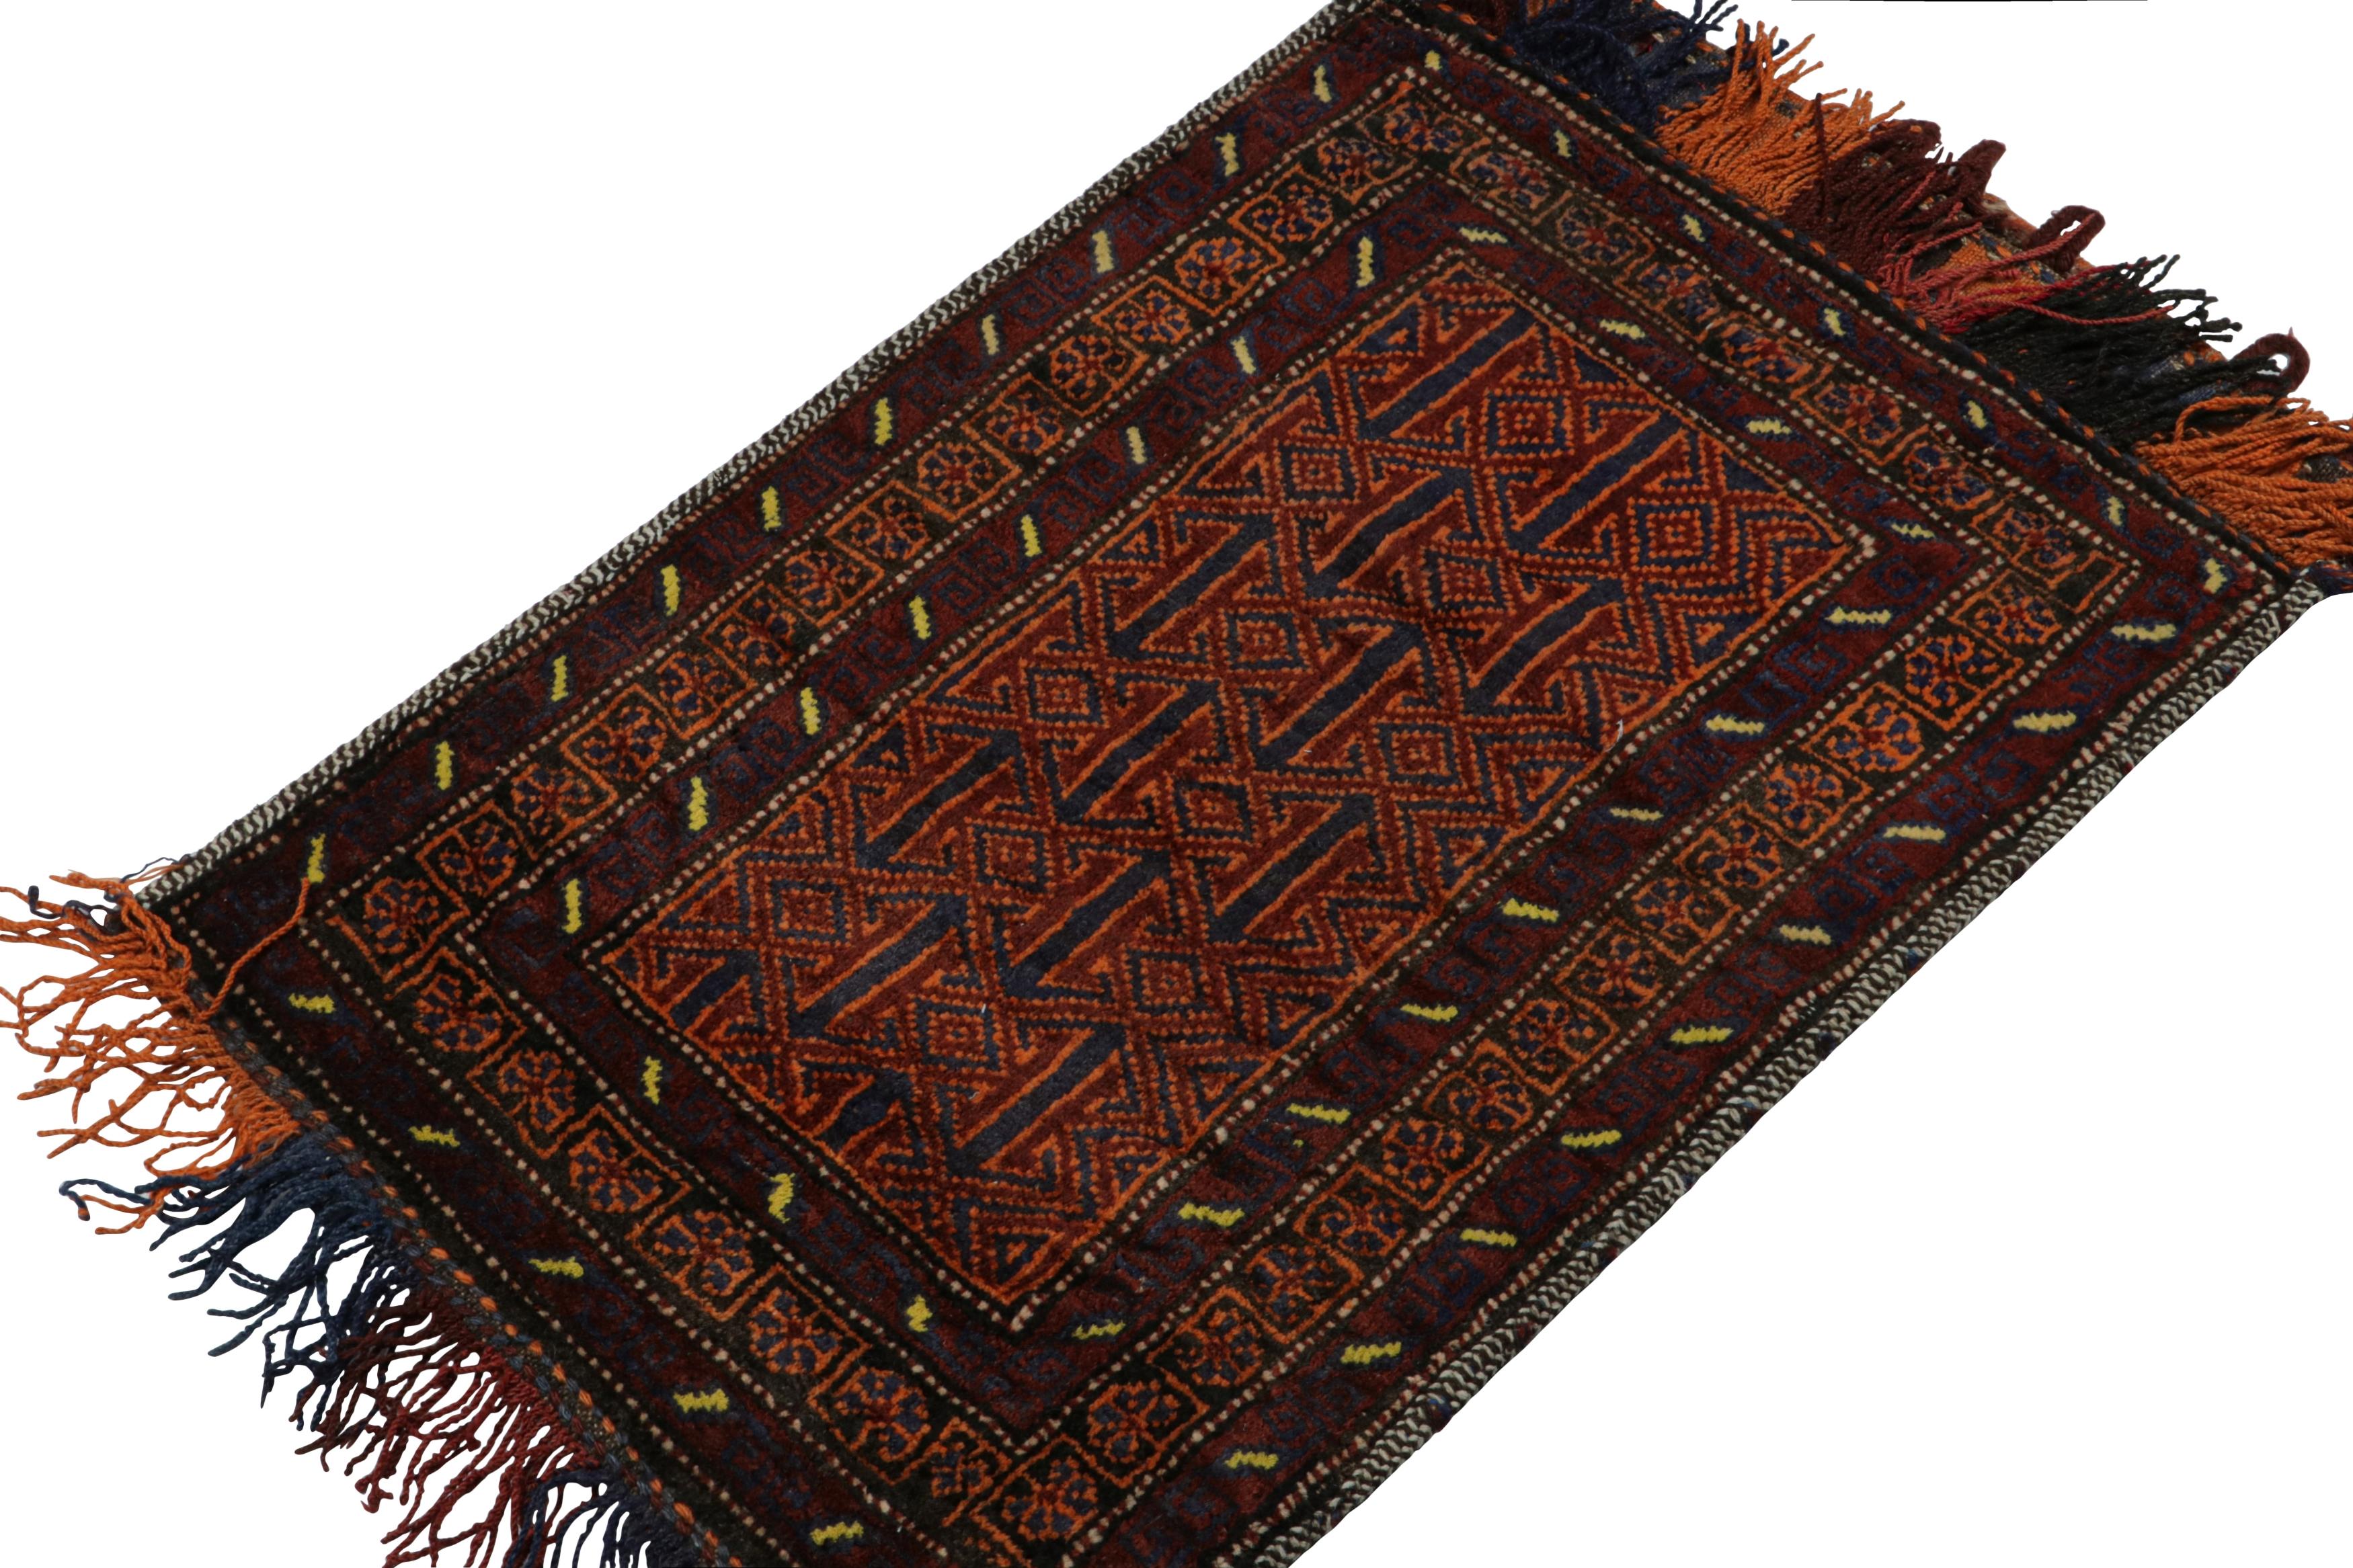 Hand-knotted in wool, this 2x3 Baluch Persian rug of the 1950s is the latest to enter Rug & Kilim’s Antique & Vintage collection.

On the Design:

The field features tribal patterns in rich tones of red-brown, blue & orange. The borders alternate in